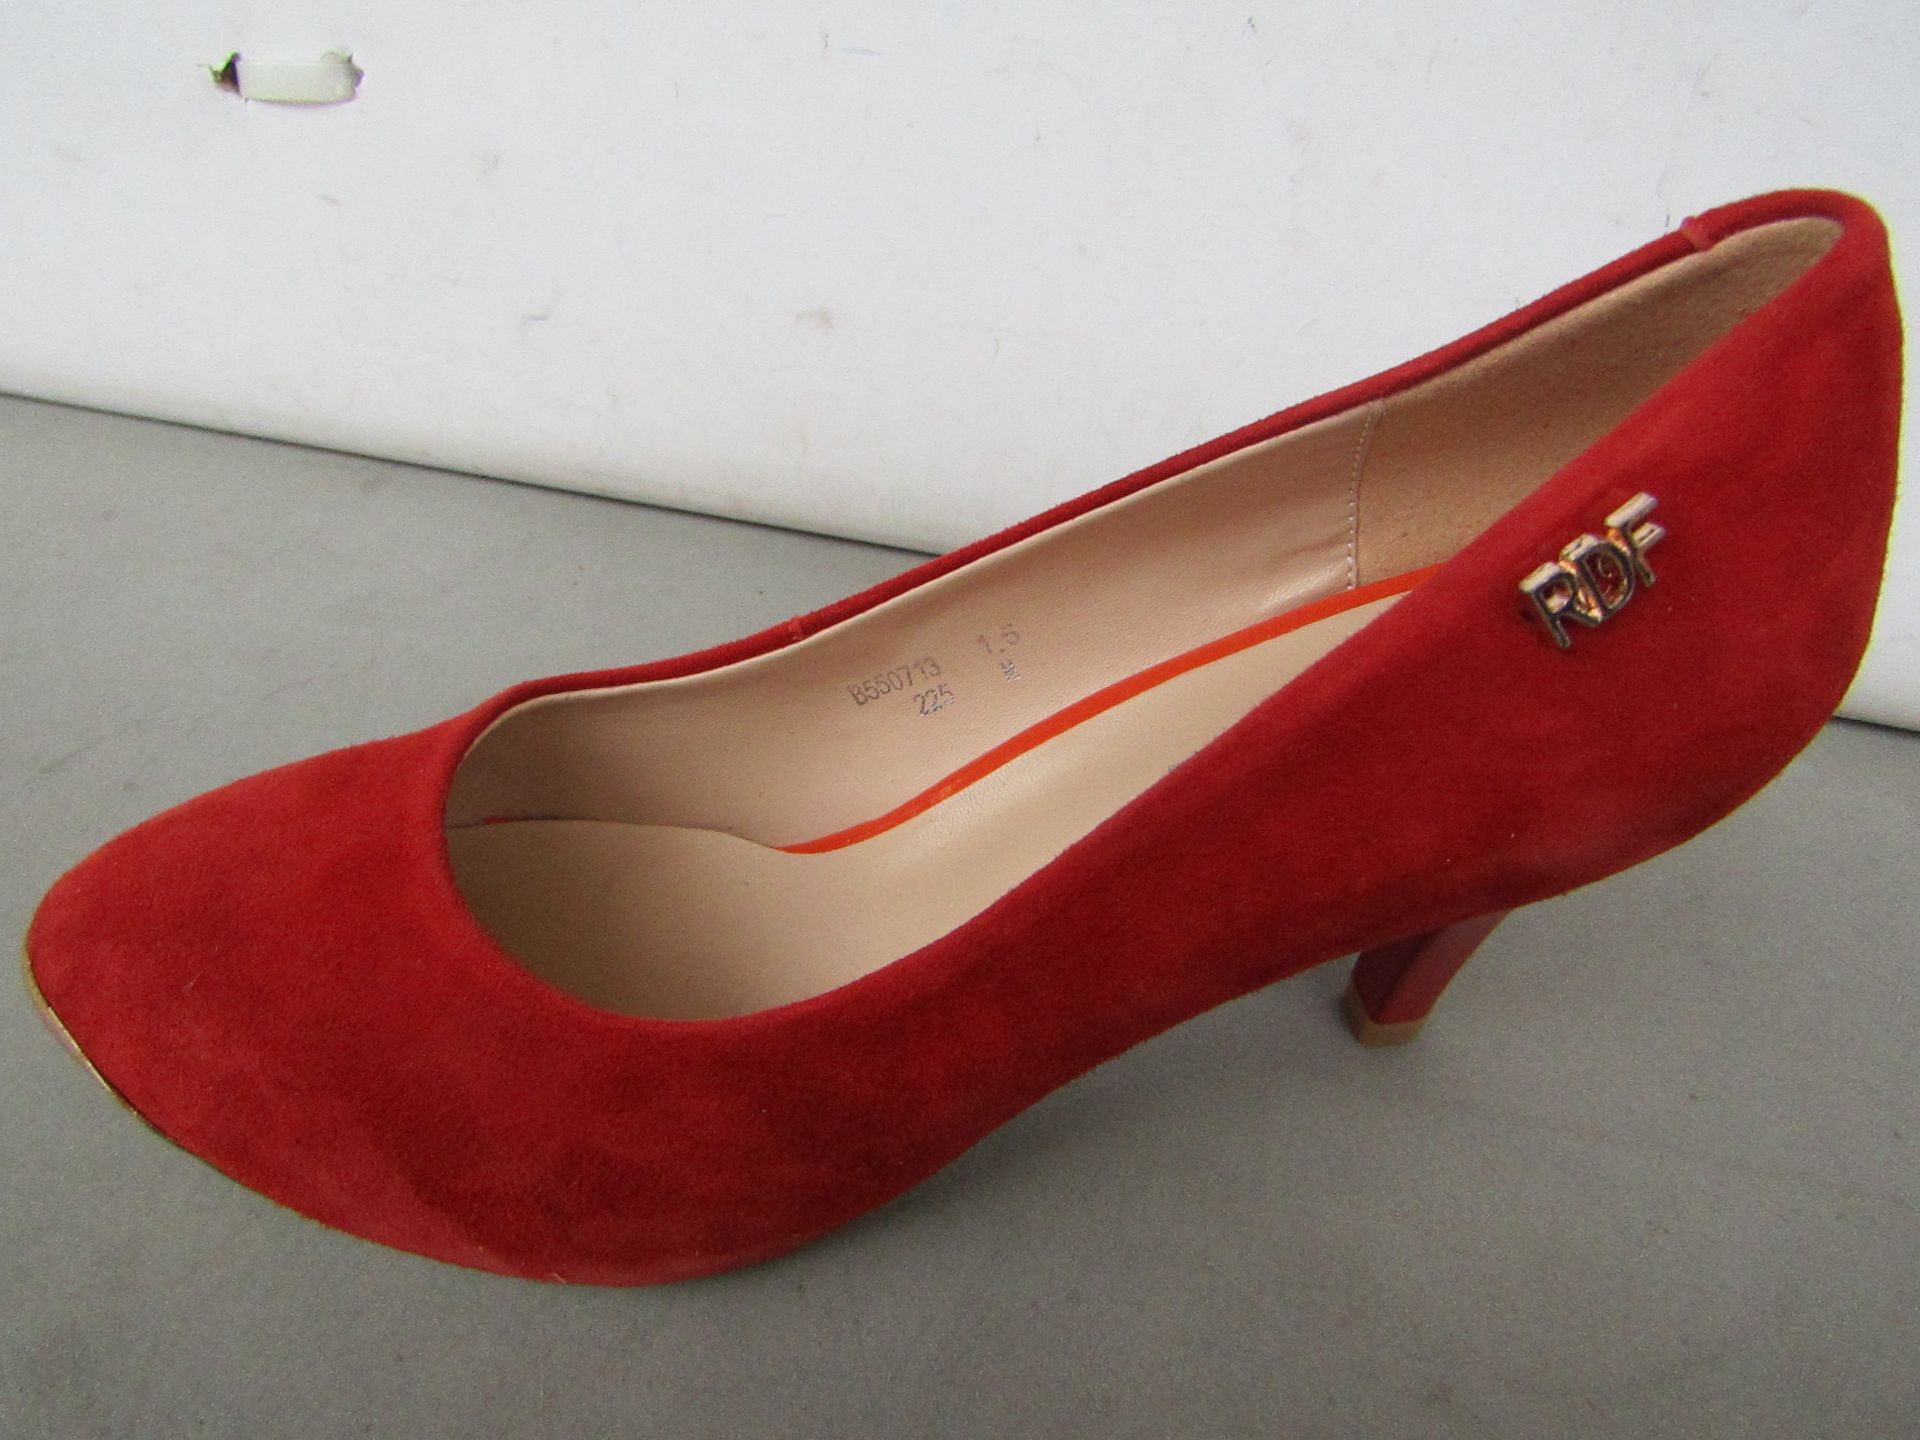 Red Dragonfly ladies Shoes size 2 1/2 Unused & boxed